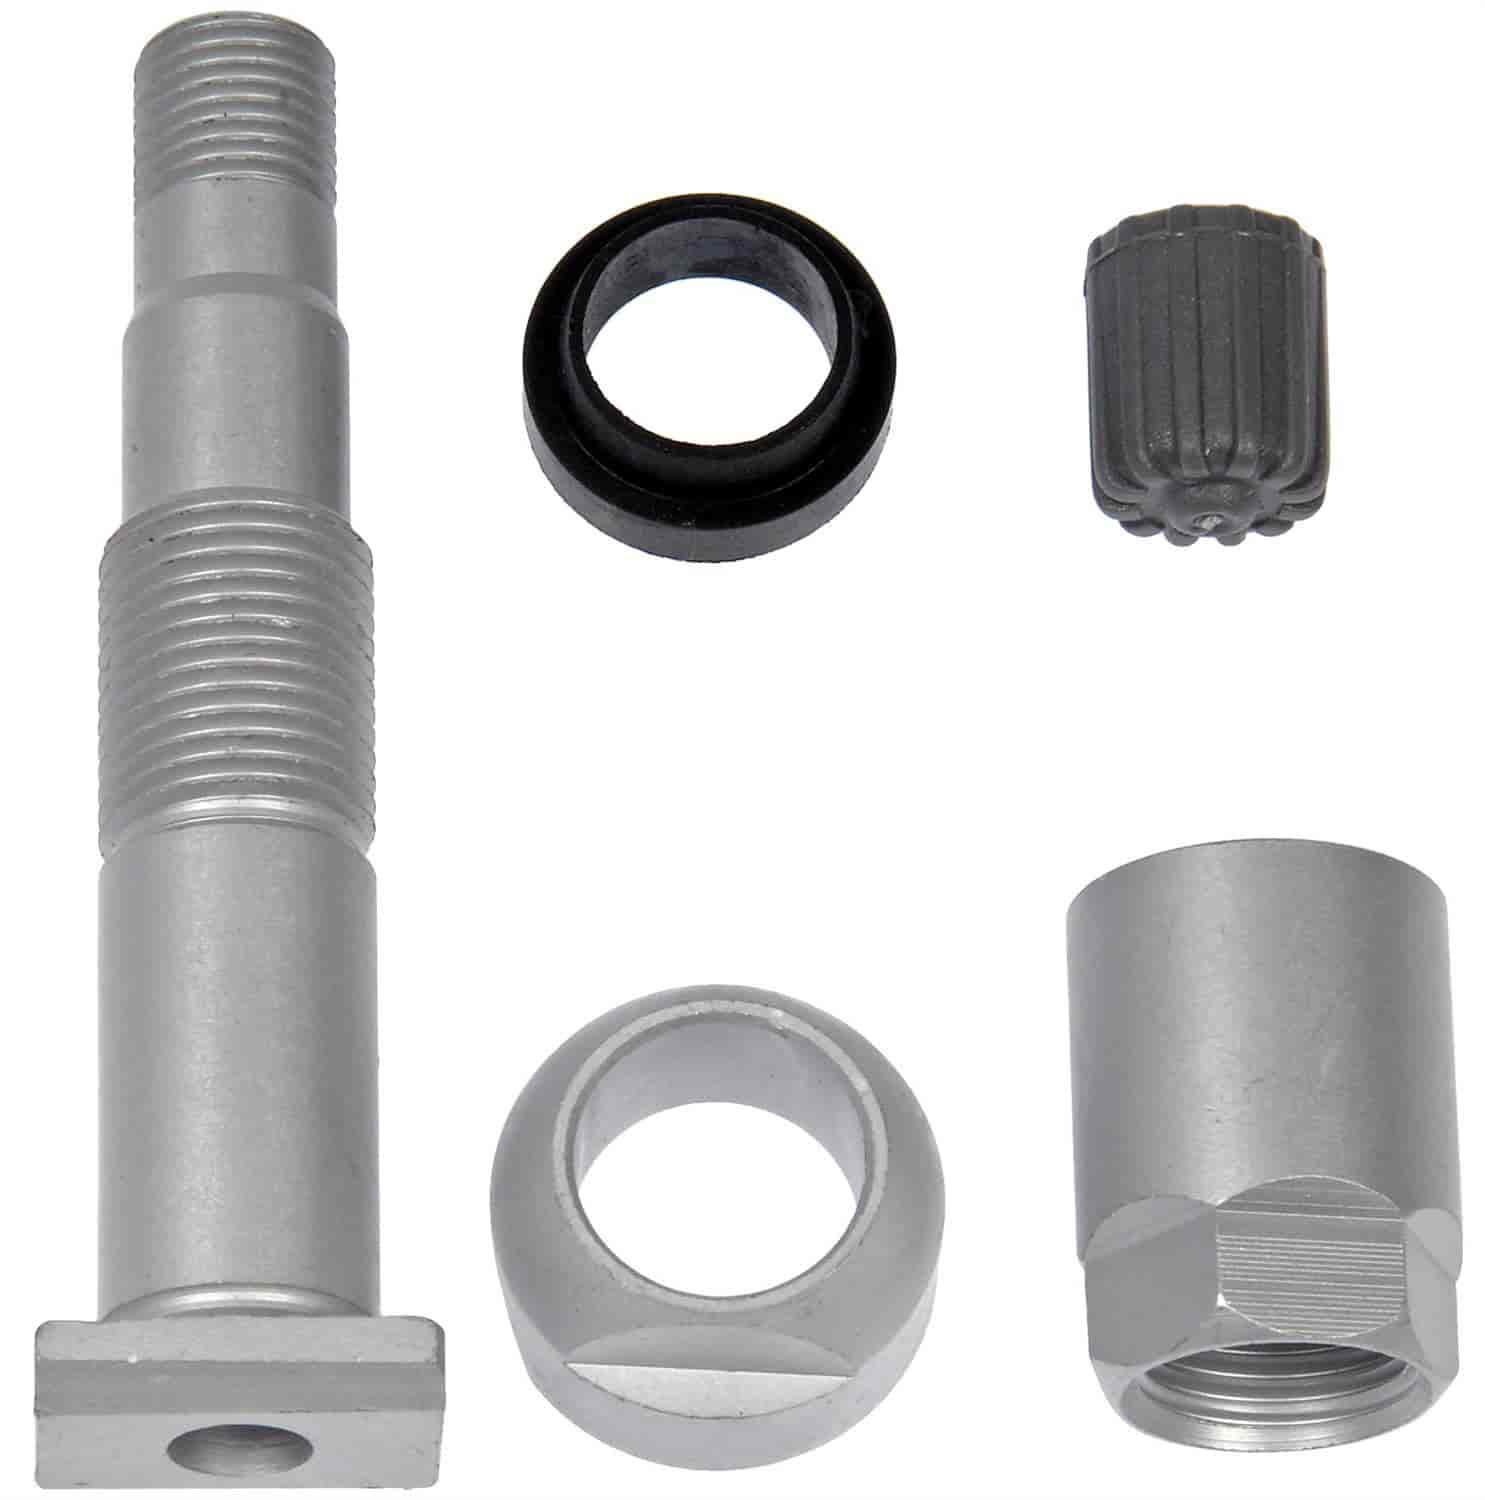 TPMS Service Kit - Replacement Valve Stem includes Stem Washer Grommet and Nut